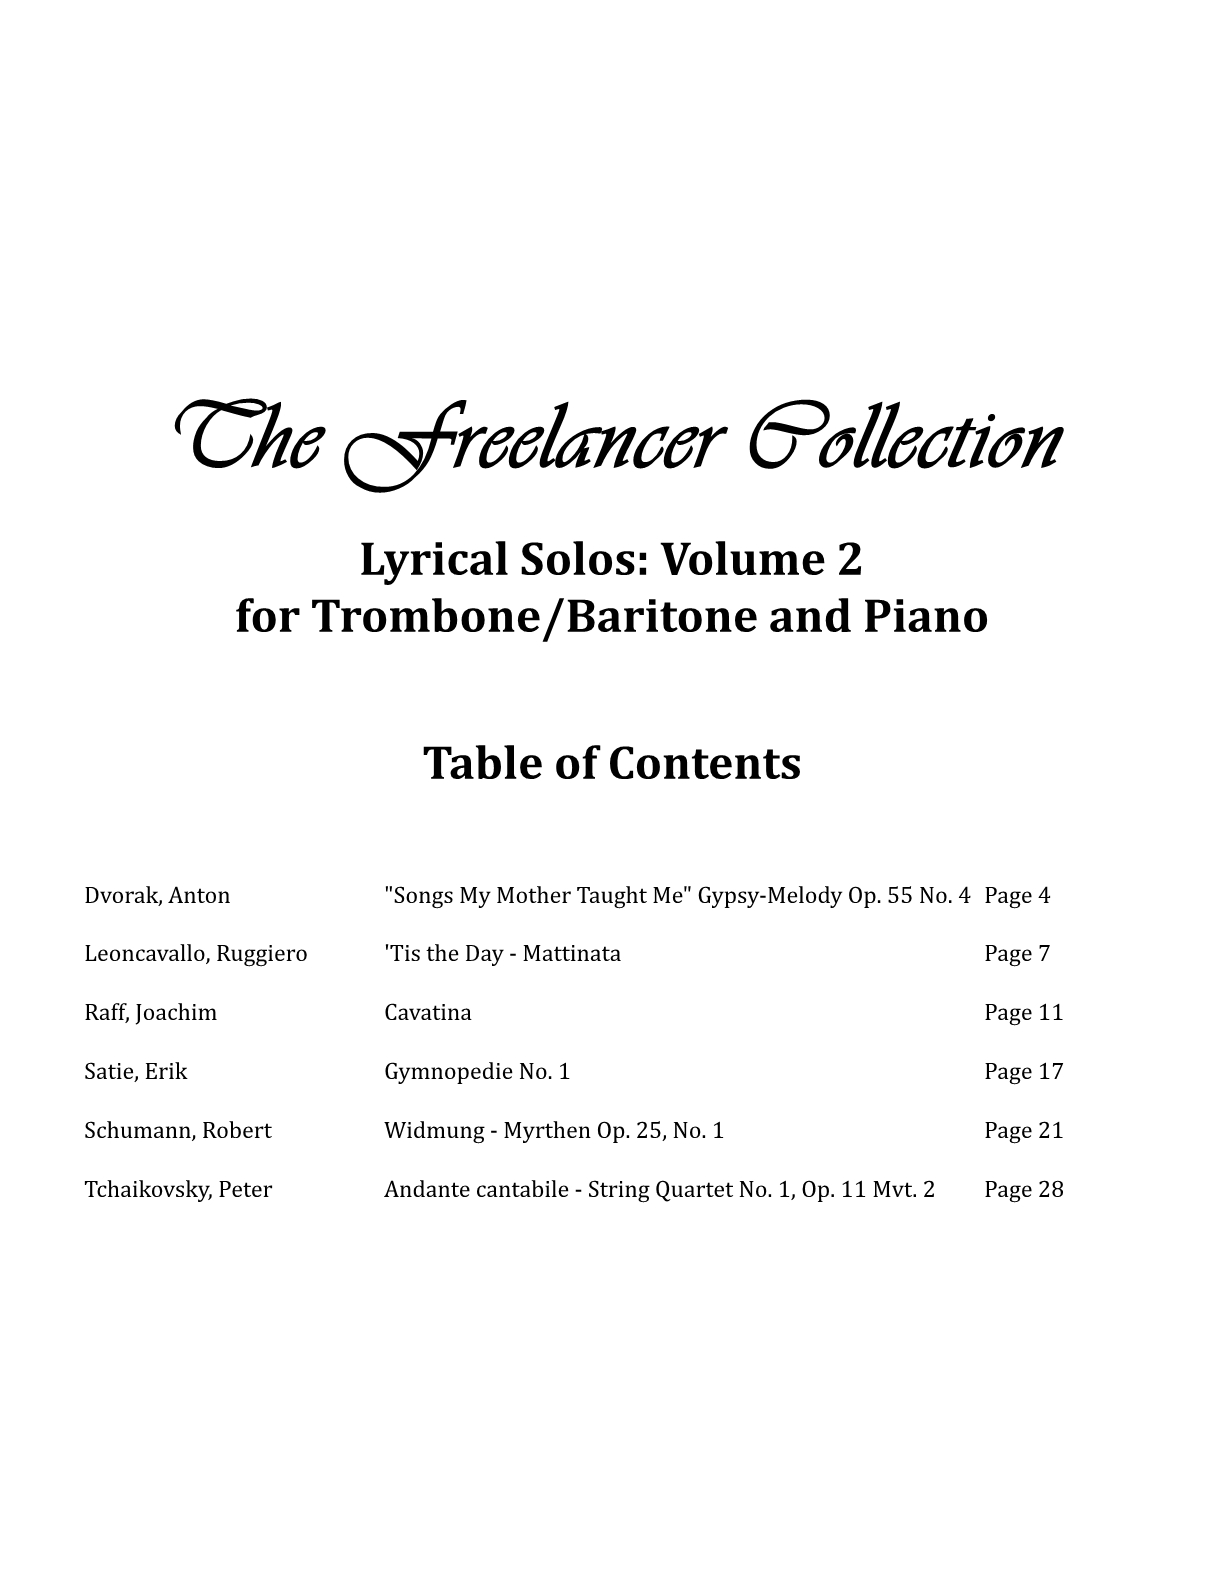 Hepler - Freelancer Collection Lyrical Solos Vol 2 (Trb & Piano) - Click Image to Close